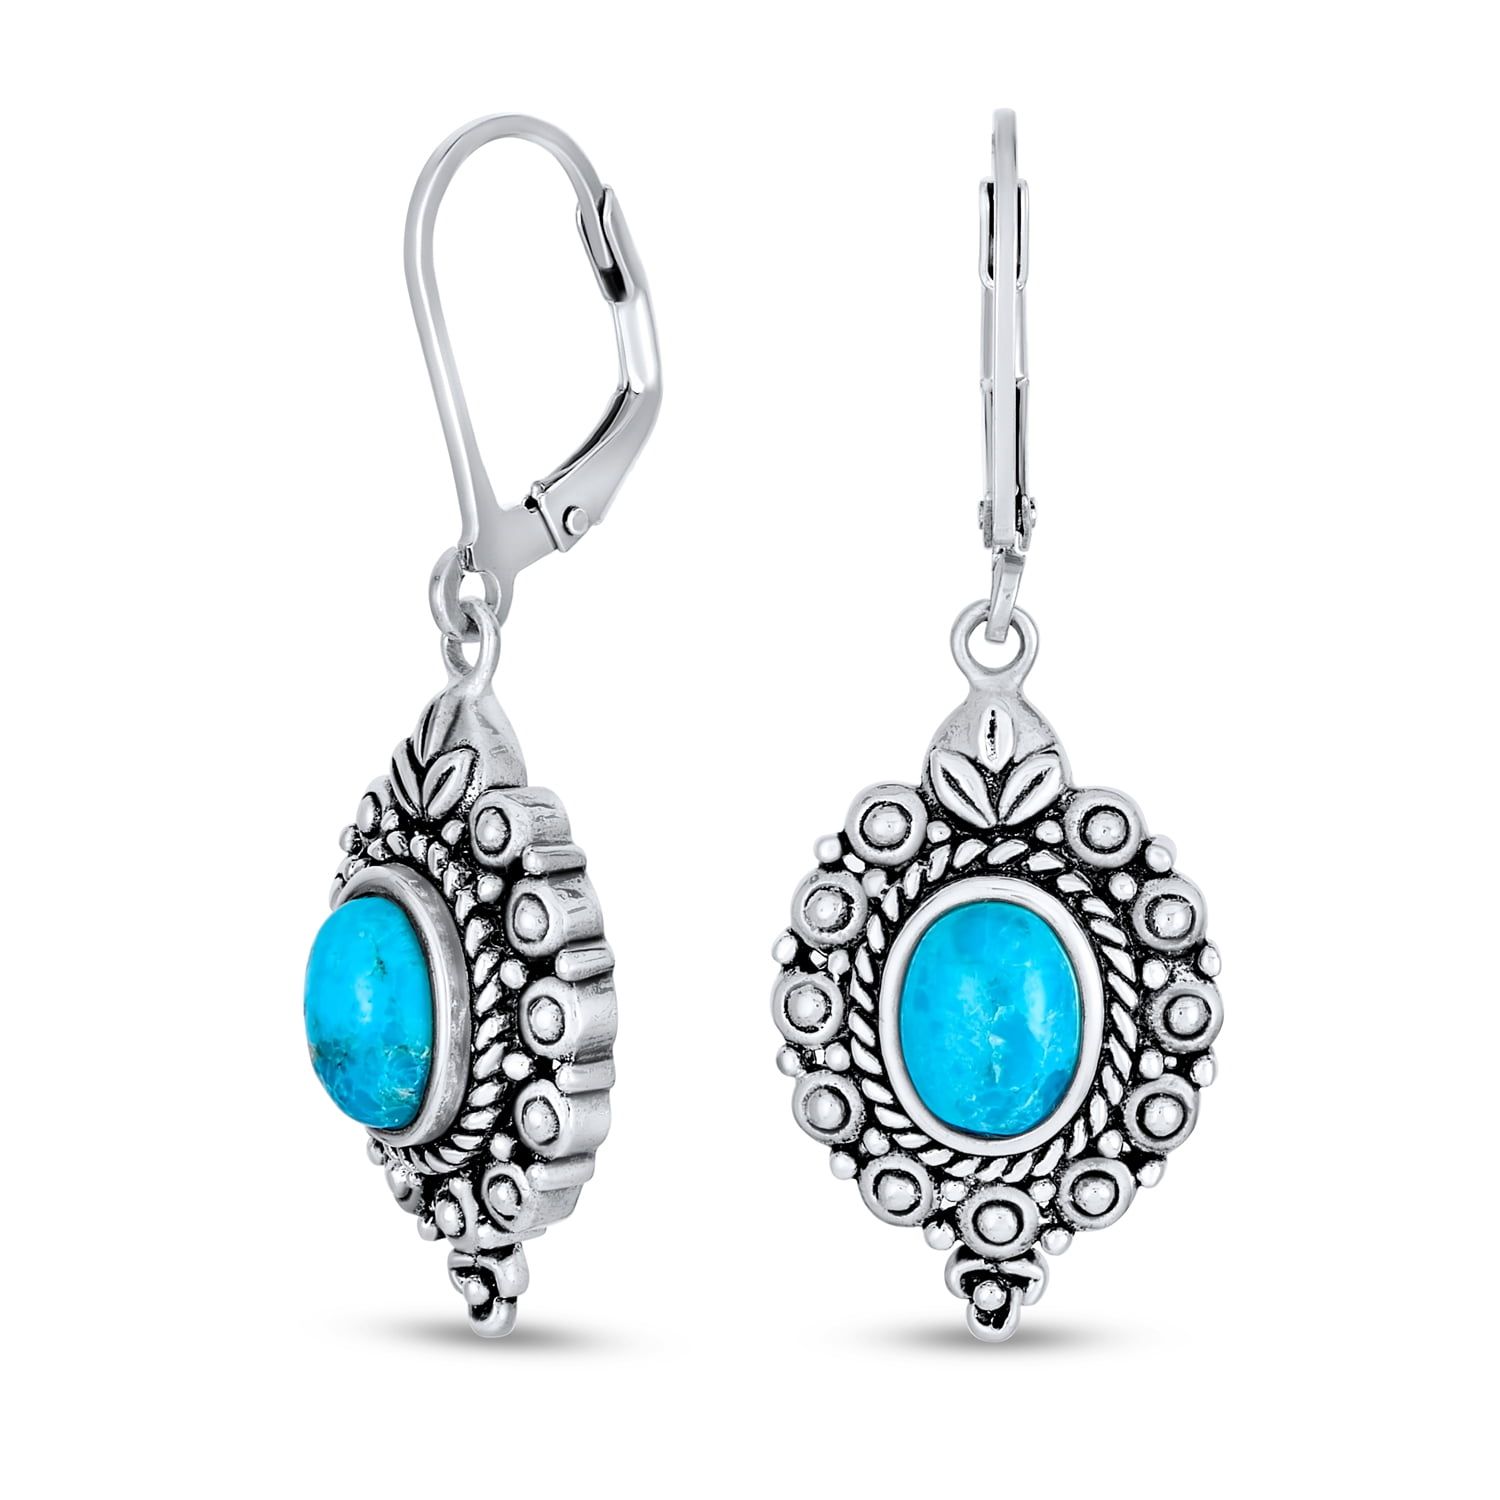 Blue Marquise Oval Crystal Simulated Turquoise Color December Birthstone Hypoallergenic Rhodium Plated Simple Drop Dangle Leverback Earrings Gift Idea